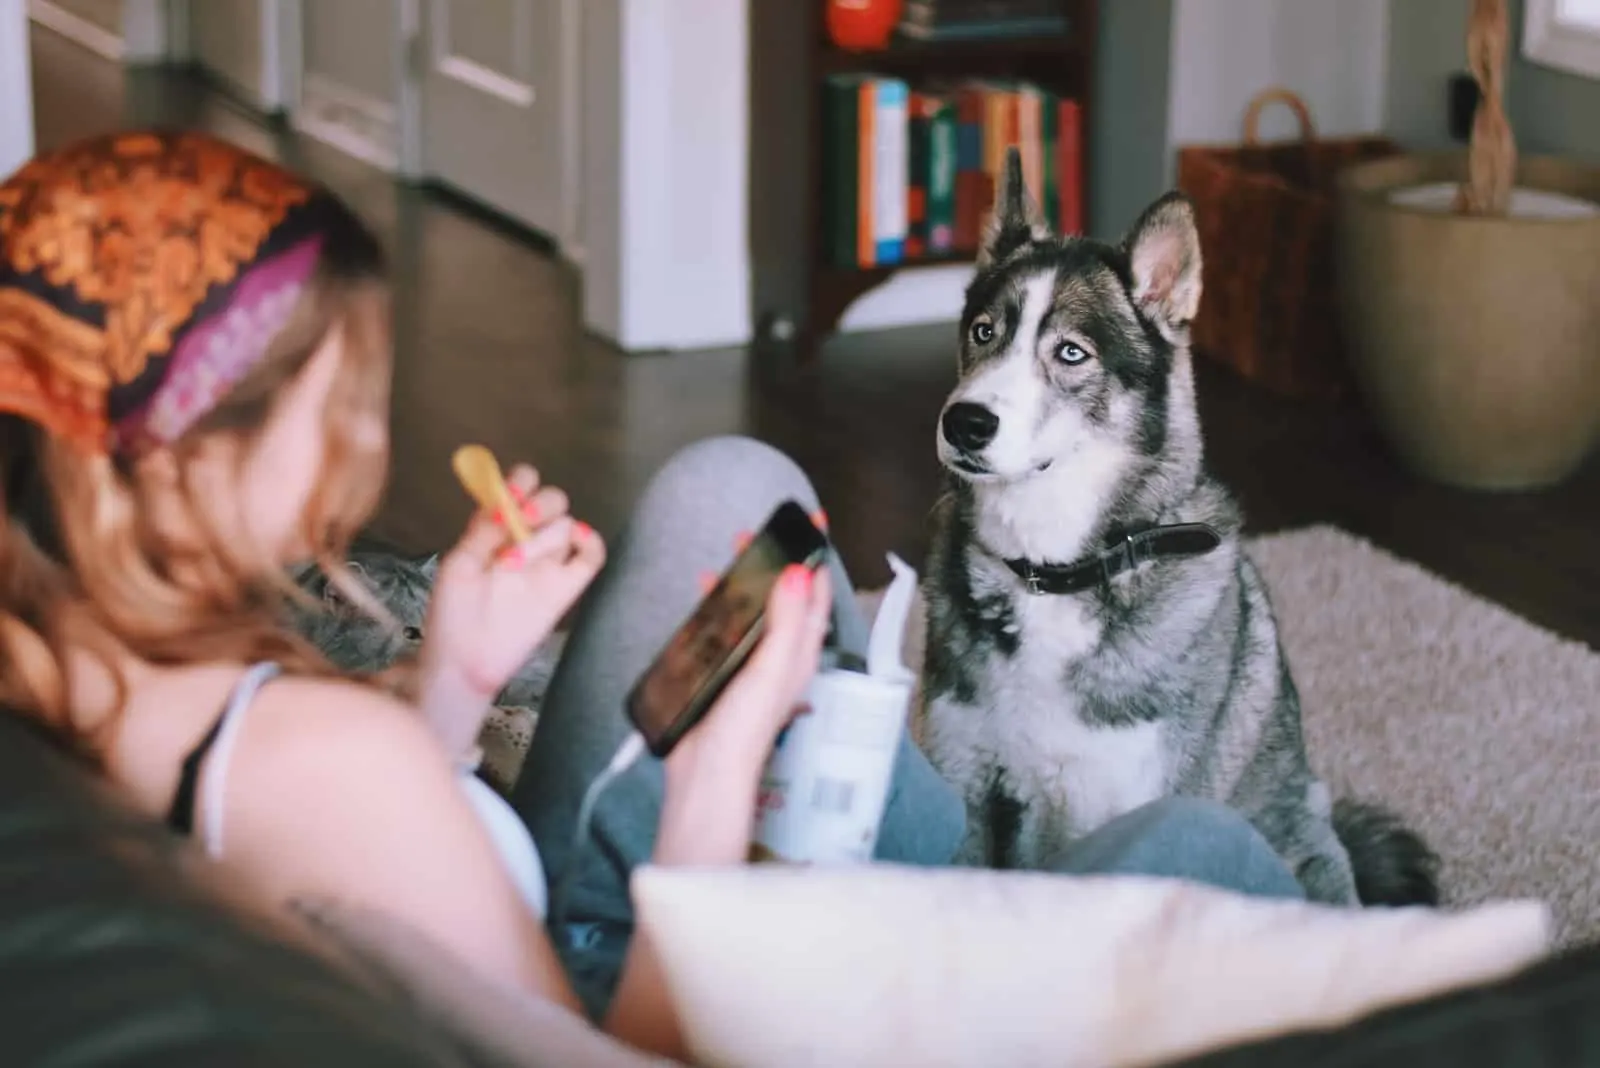 woman sits and eats chips while the dog watches her closely